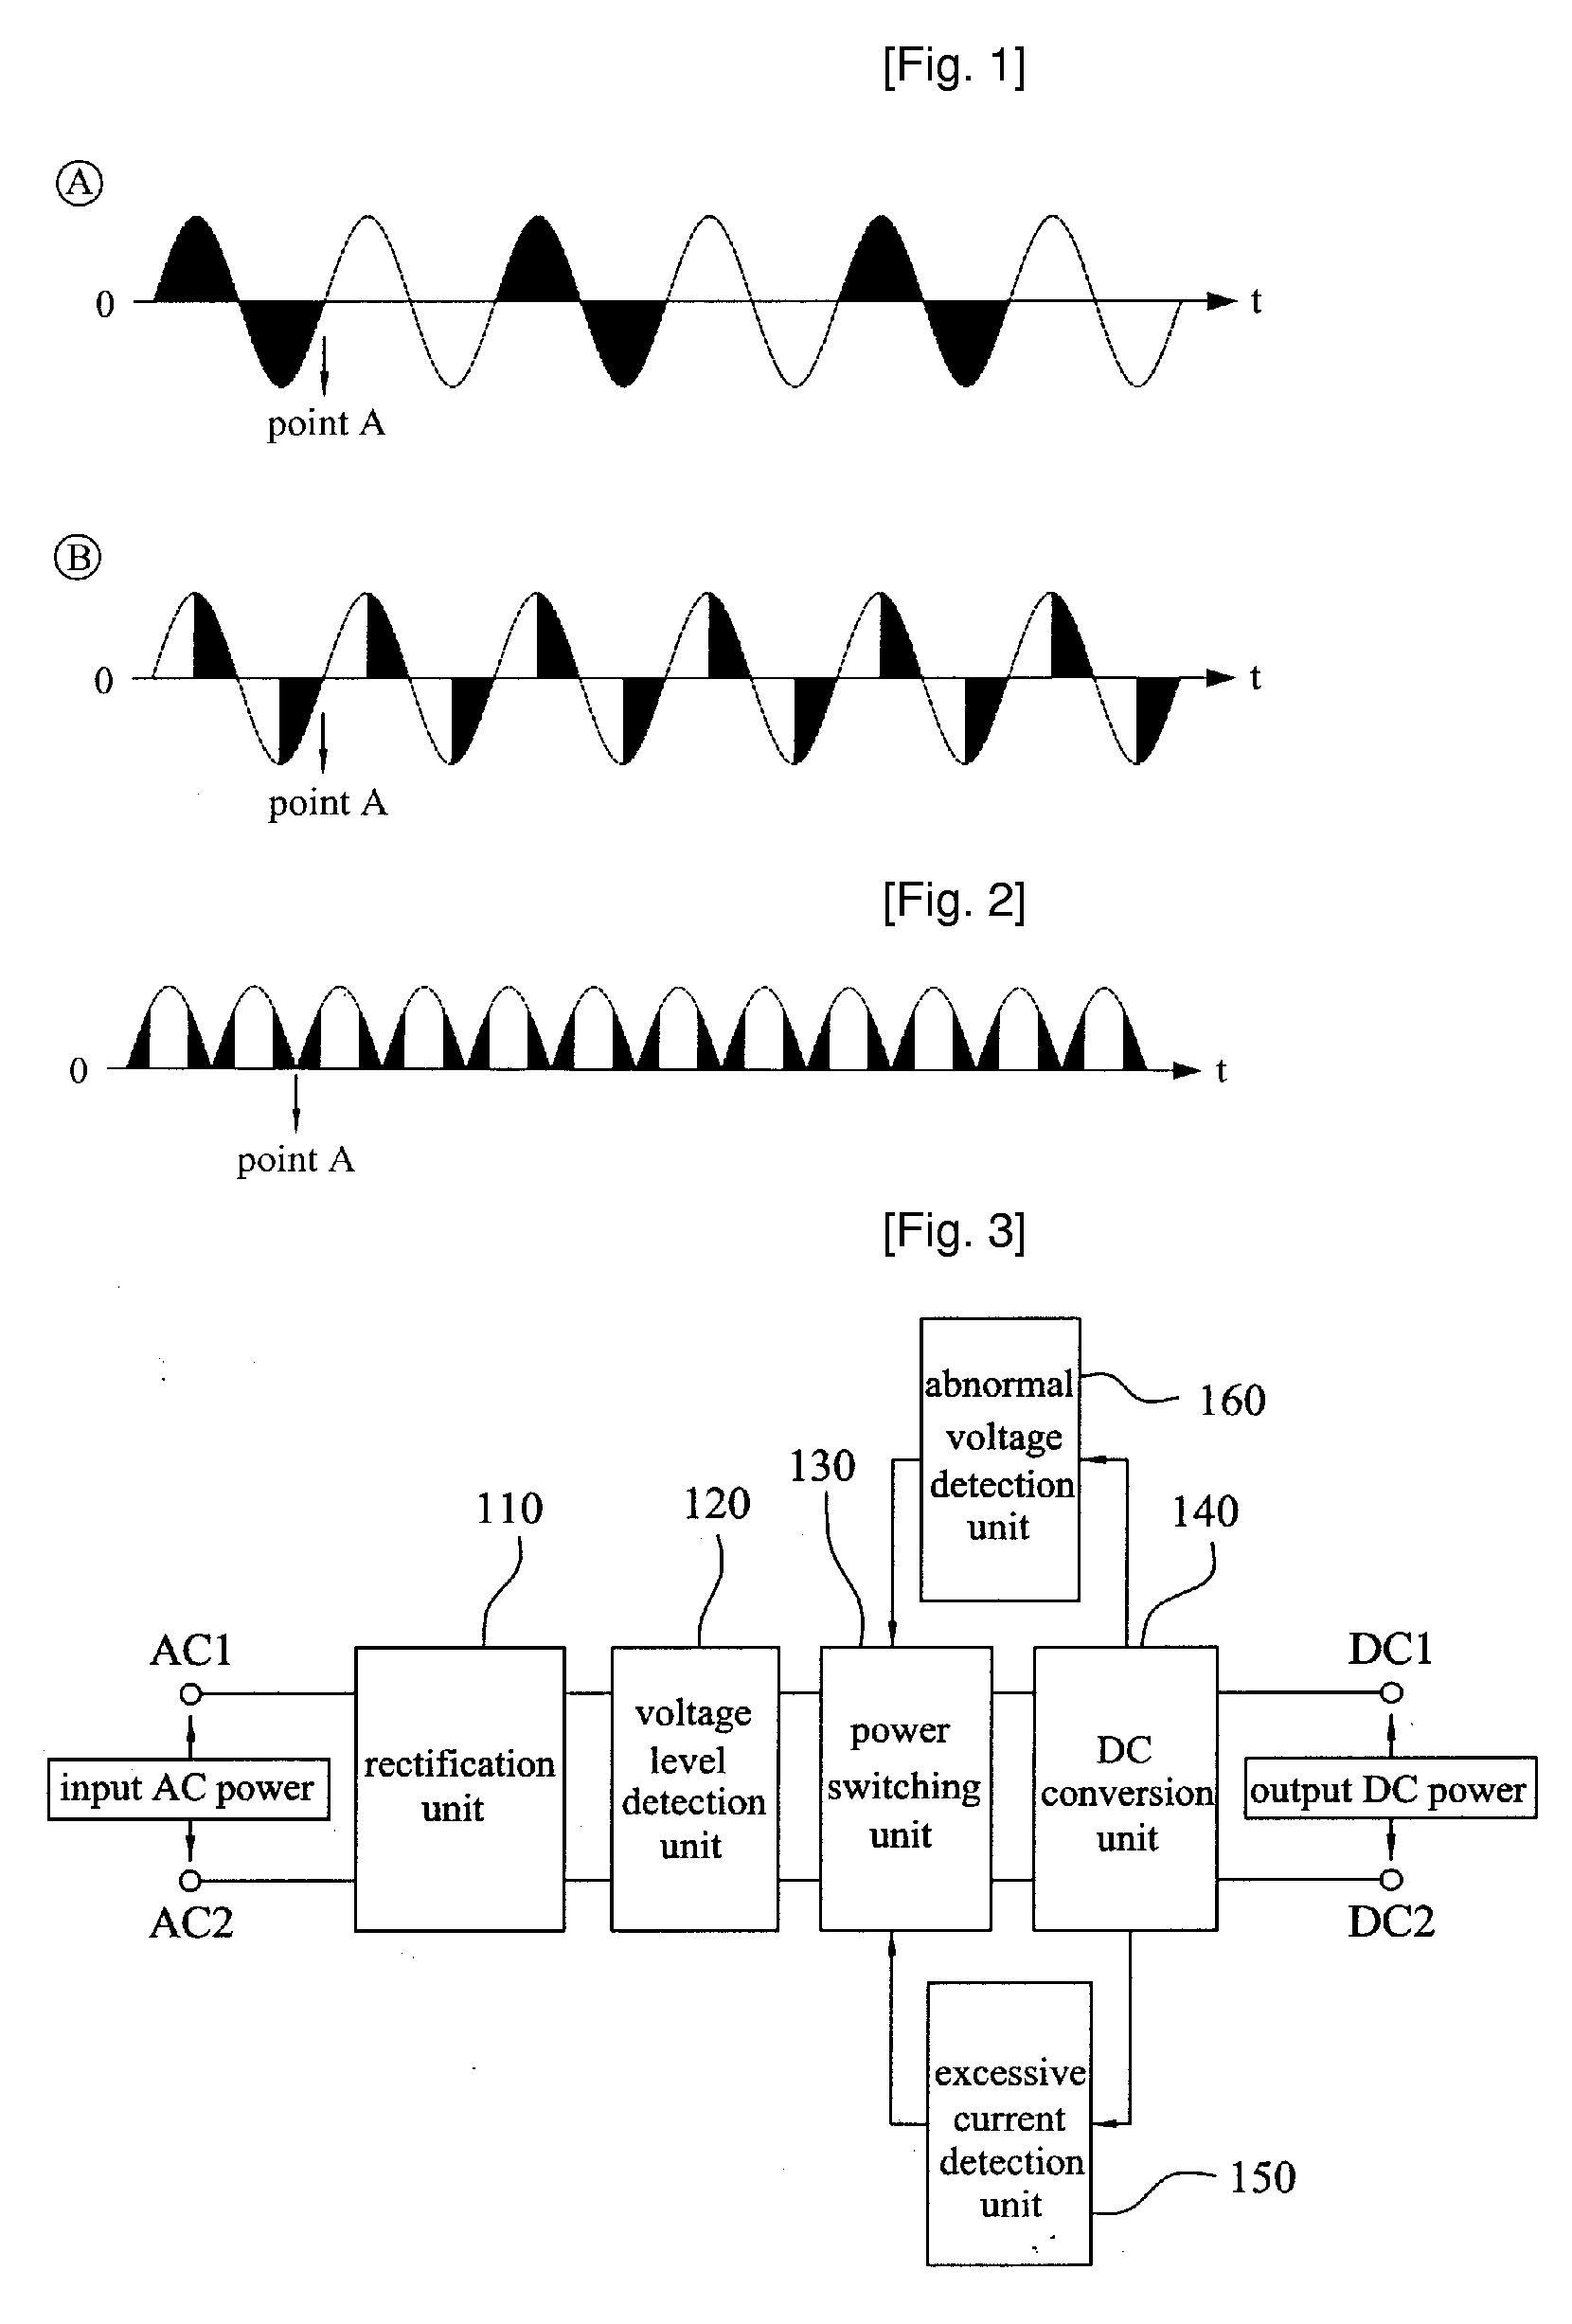 Method for Controlling Low-Voltage Using Waves Ac and System for Performing the Same